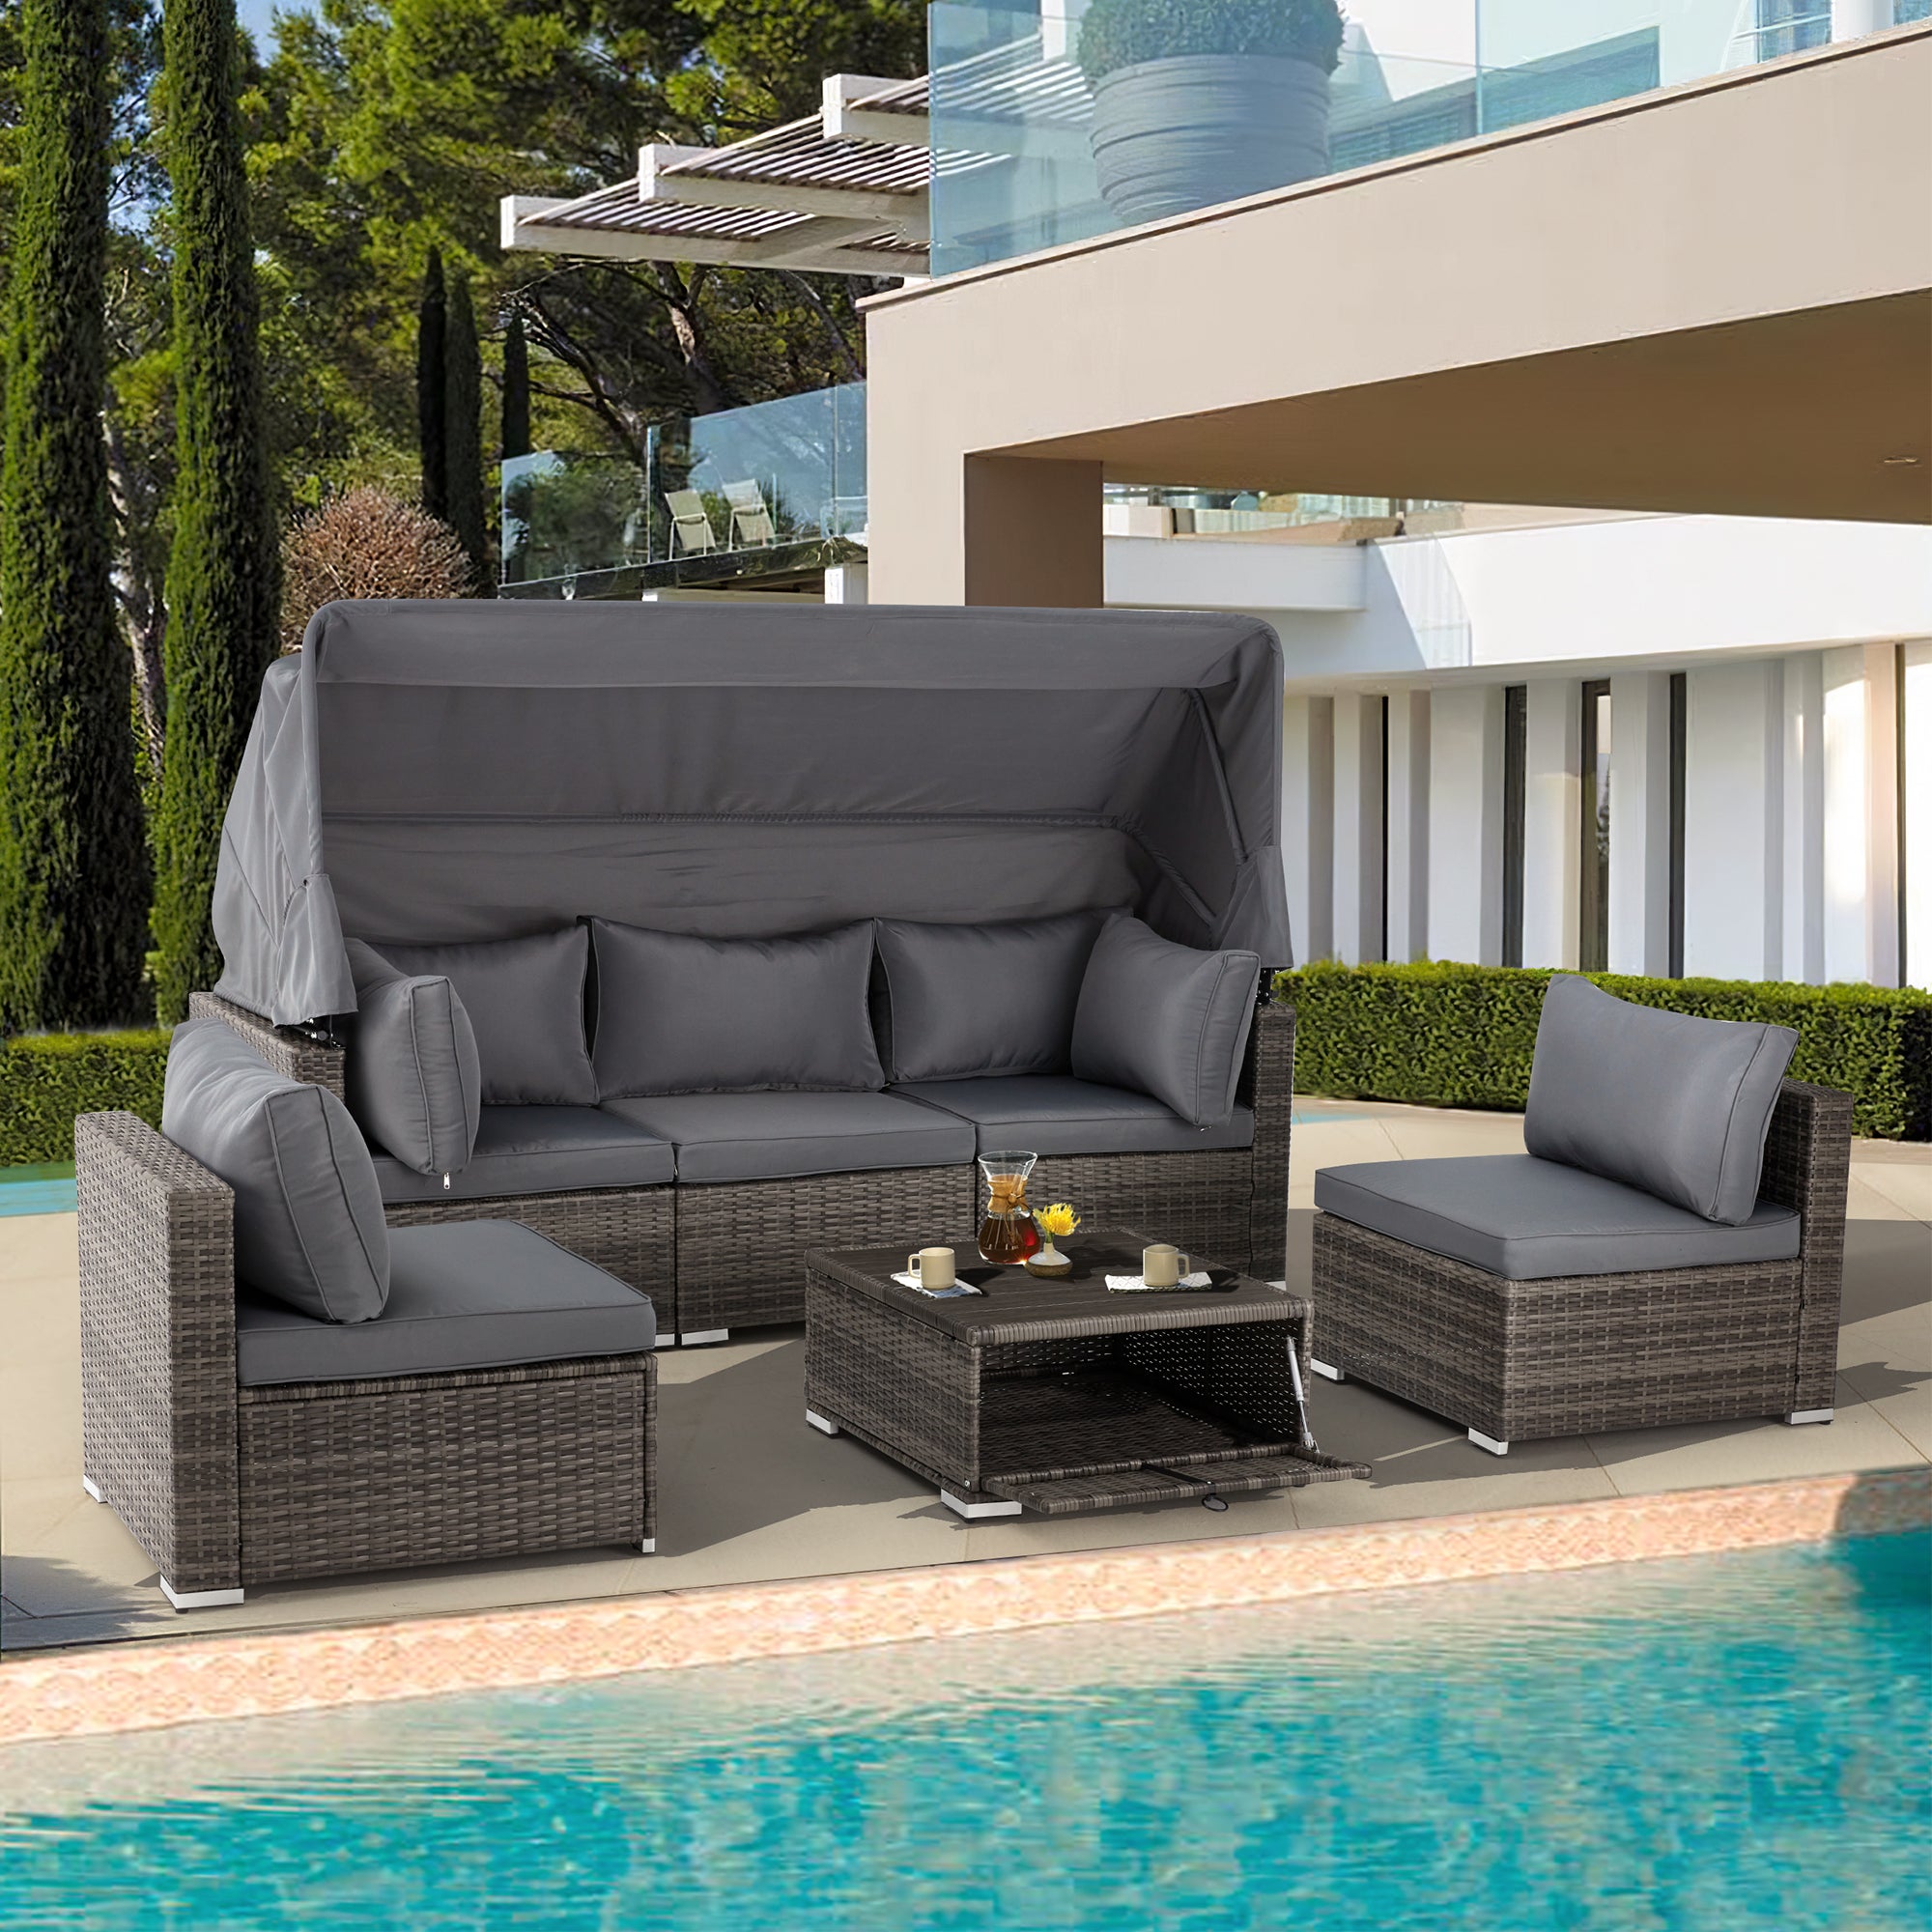 homrest-6-pcs-outdoor-sectional-sofa-daybed-w-retractable-canopy-adjustable-backrest-cushion-coffee-table-grey